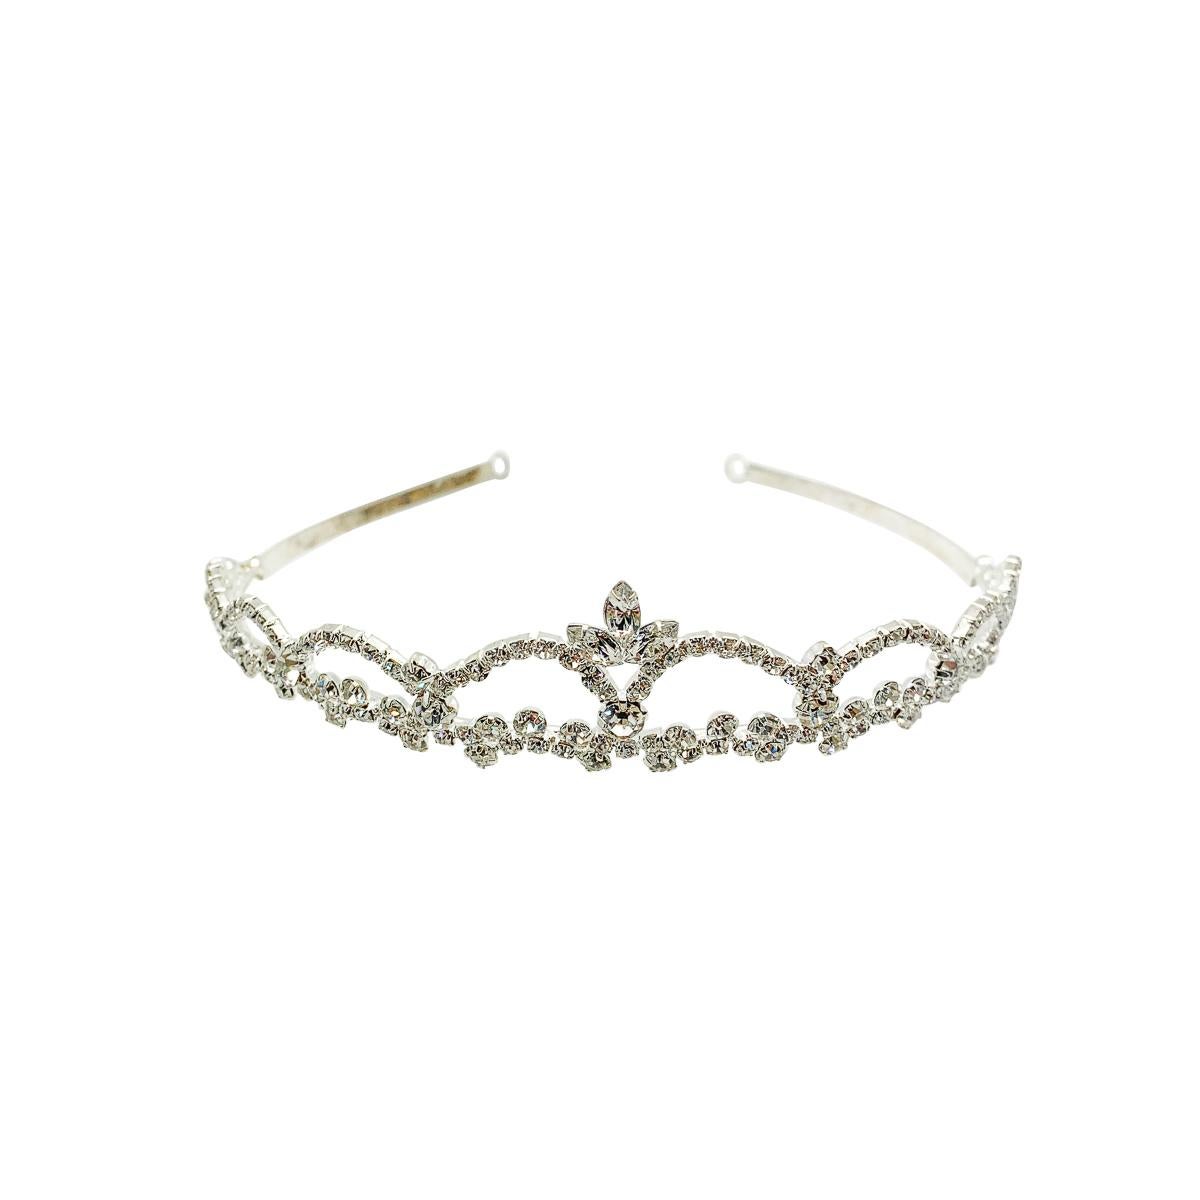 A very pretty vintage arch tiara. Enjoy the age-old tradition on your wedding day with this emblem that signifies the crowning of love.

Vintage Condition: Very good without damage or noteworthy wear.
Materials: silver plated metal, glass